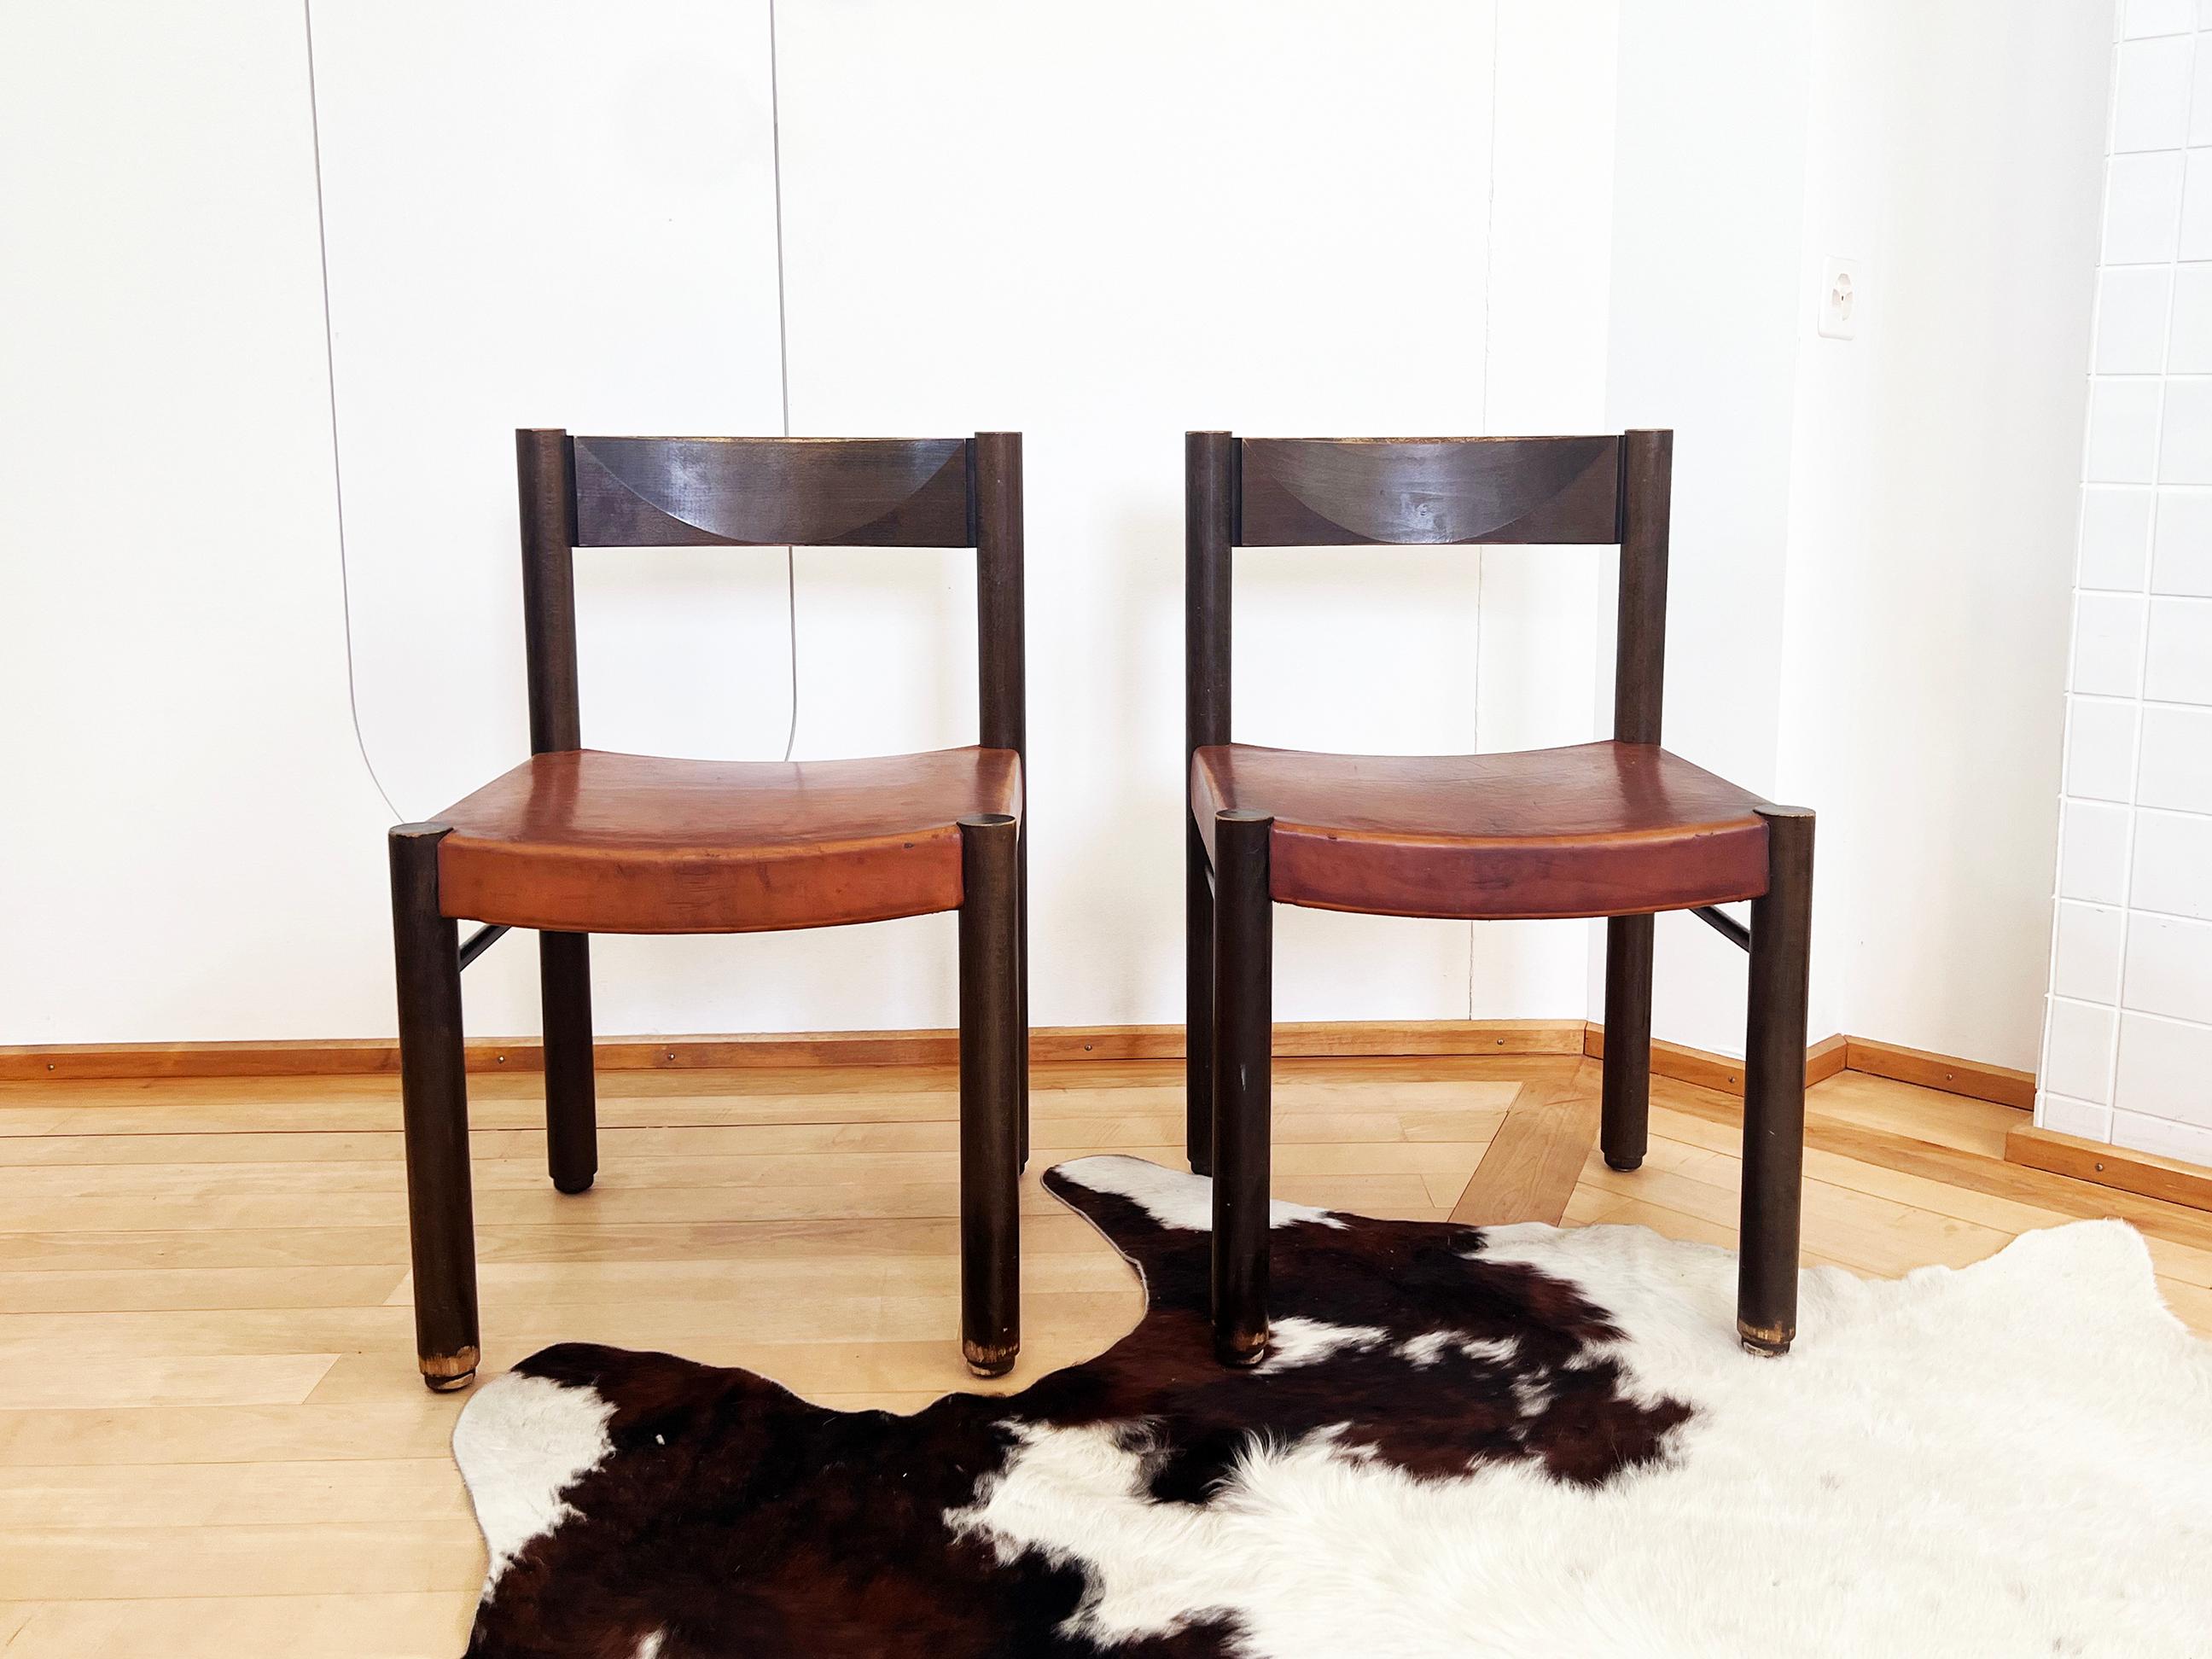 Swiss Robert and Trix Haussmann Tiger Oak and Saddle Leather Dining Chairs Midcentury